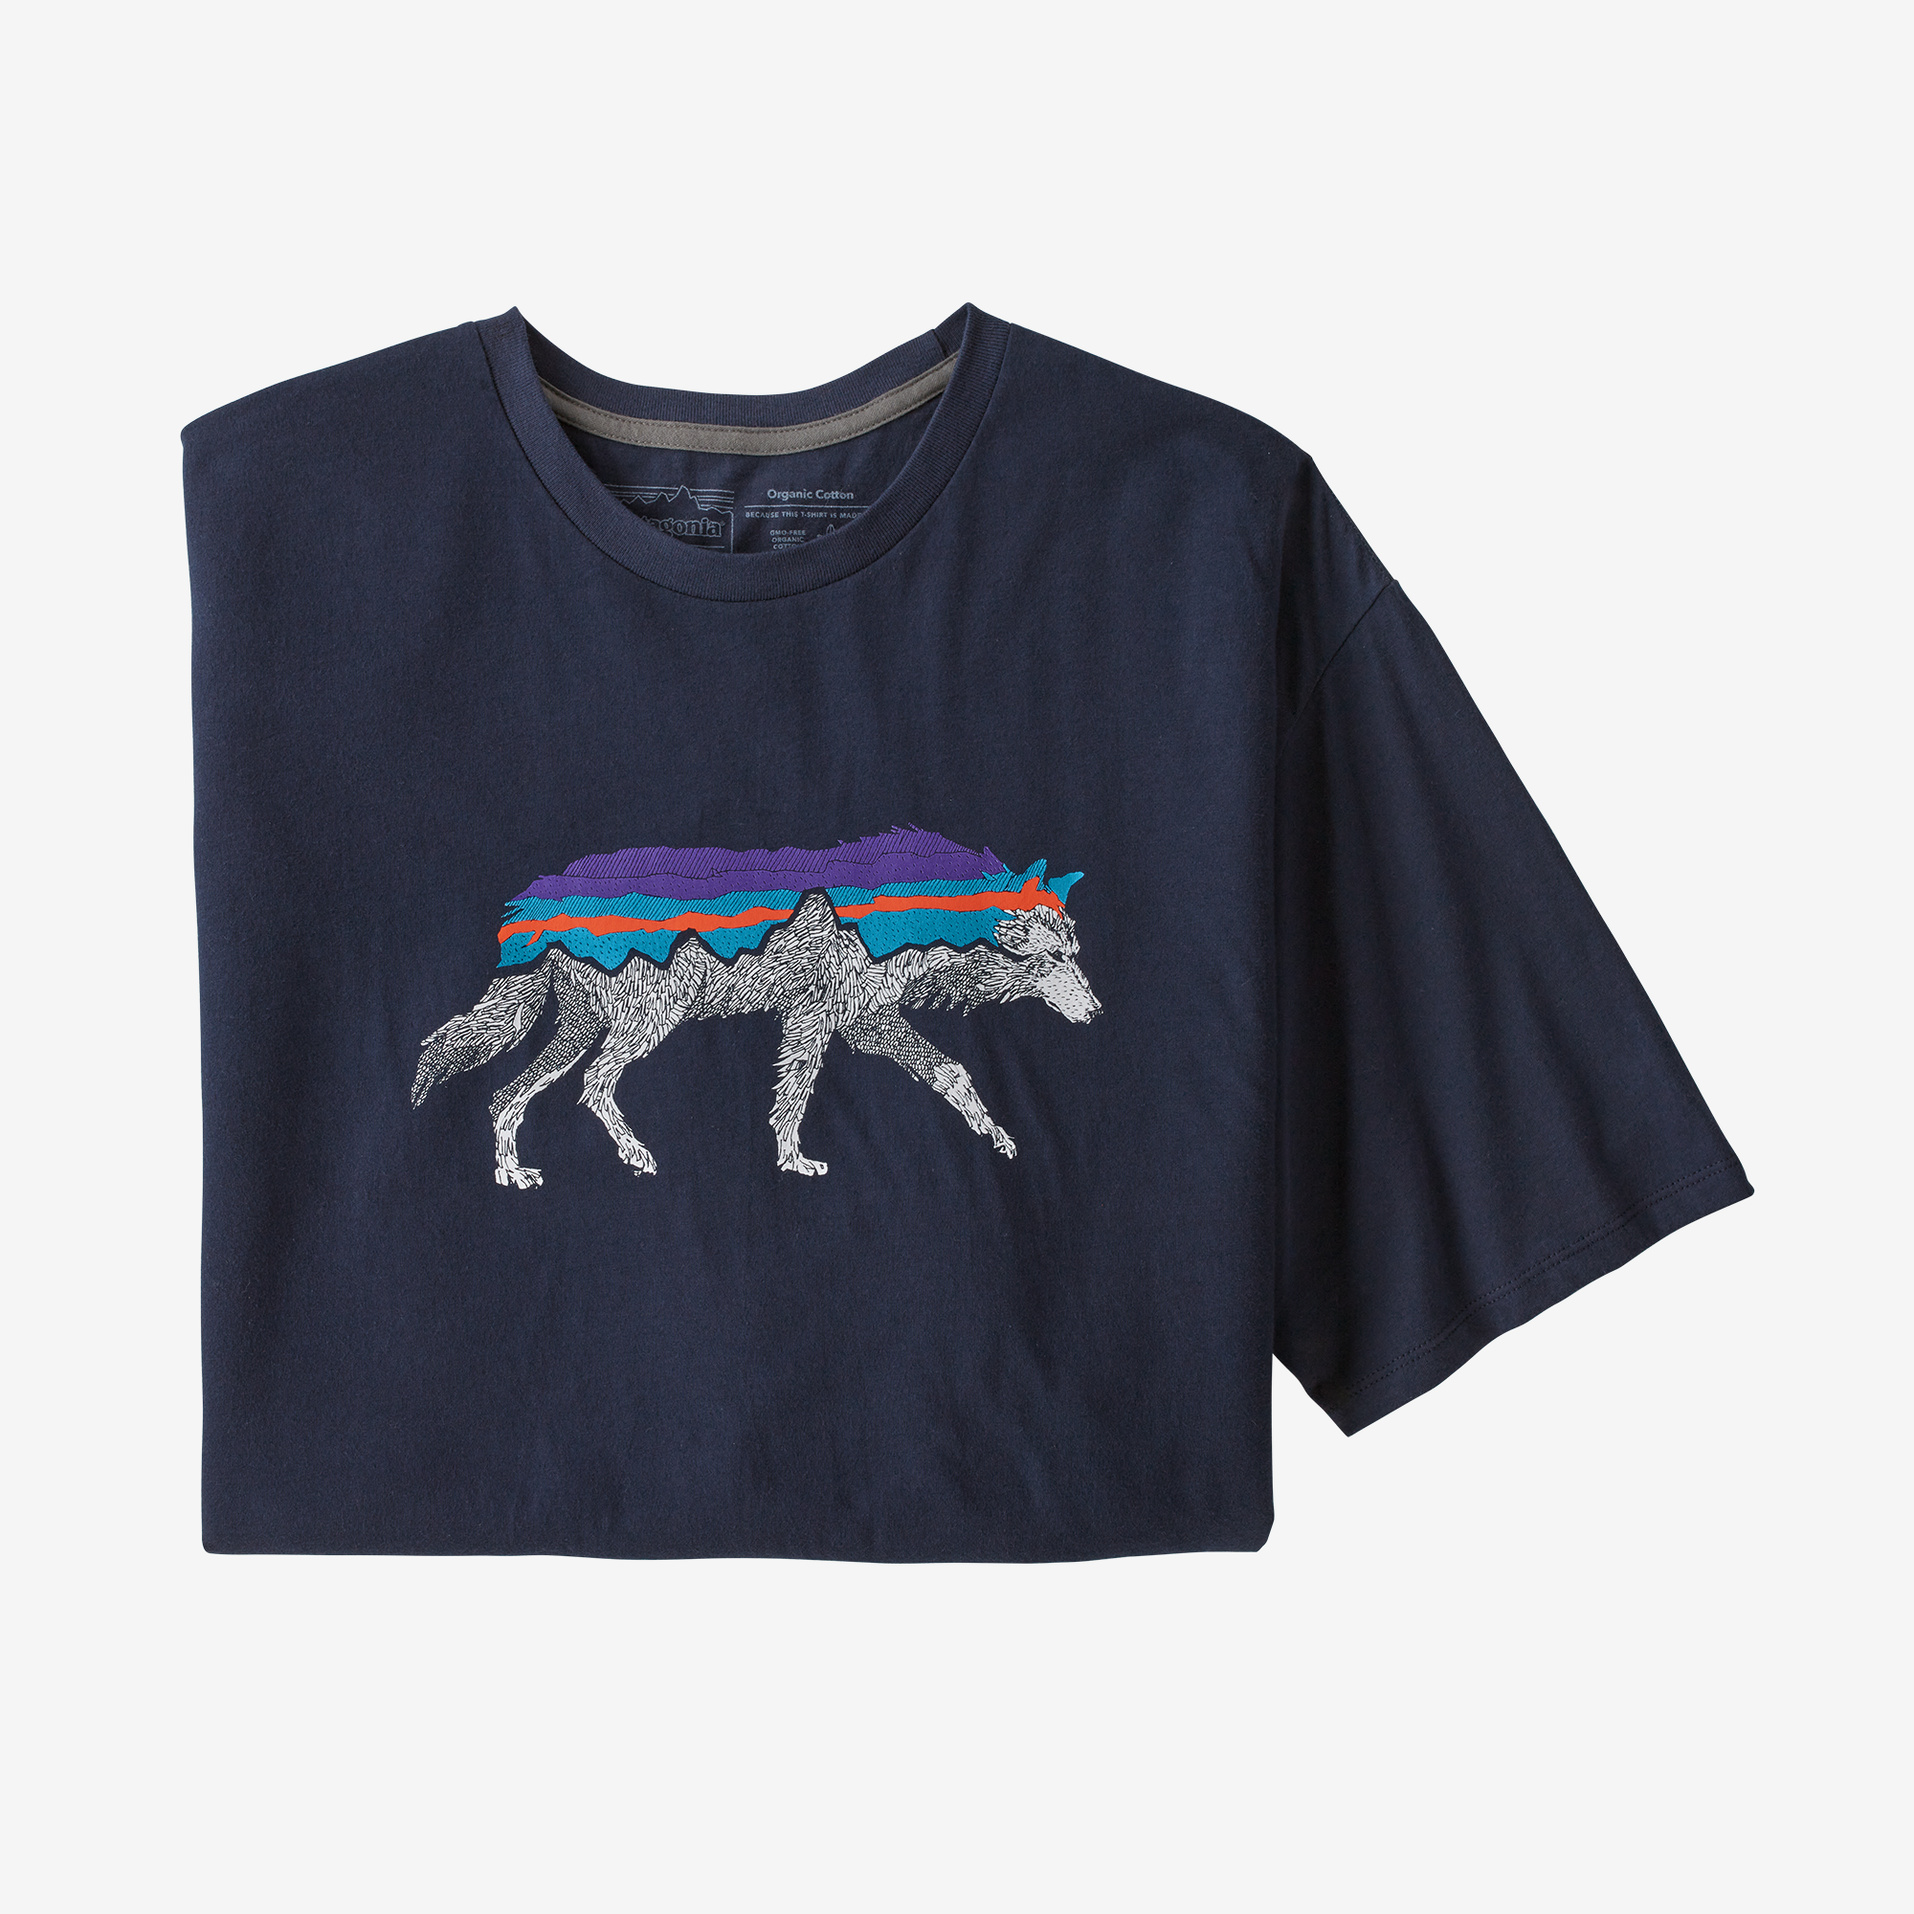 Patagonia M's Back For Good Organic T-Shirt - New Navy w/ Wolf - XXL